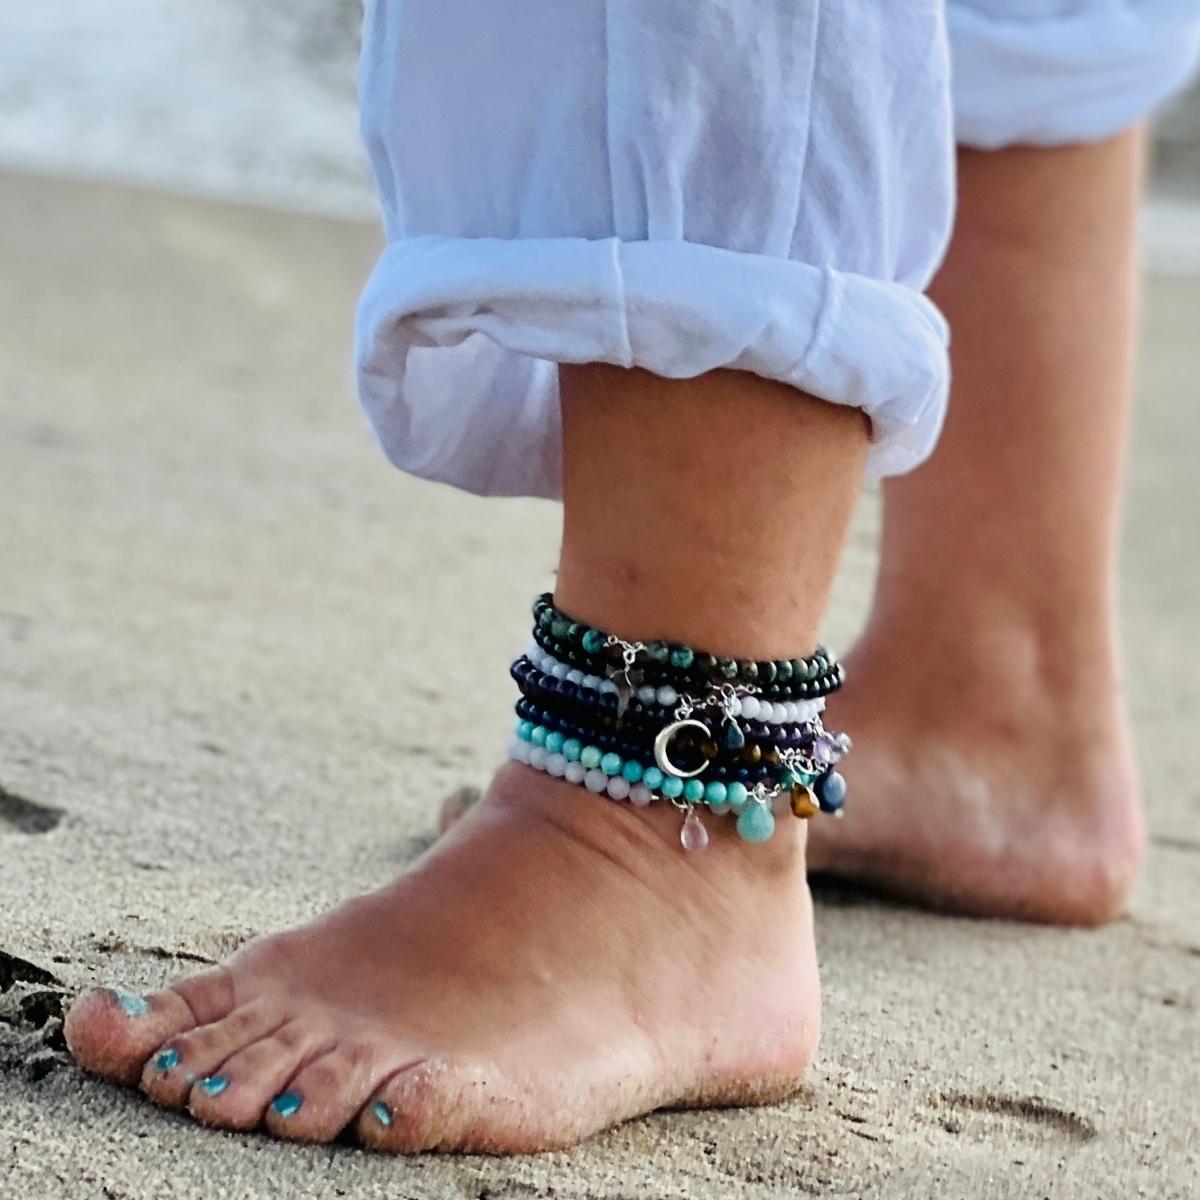 Anklet season is back! Shop our cutest styles in time for summer! With plenty of classic colors and earthy tones, pairing your mood with the jewelry that you wear around your ankle is made for easy pairing. Wear these crystal healing anklets and feel the empowering energies every step you take!